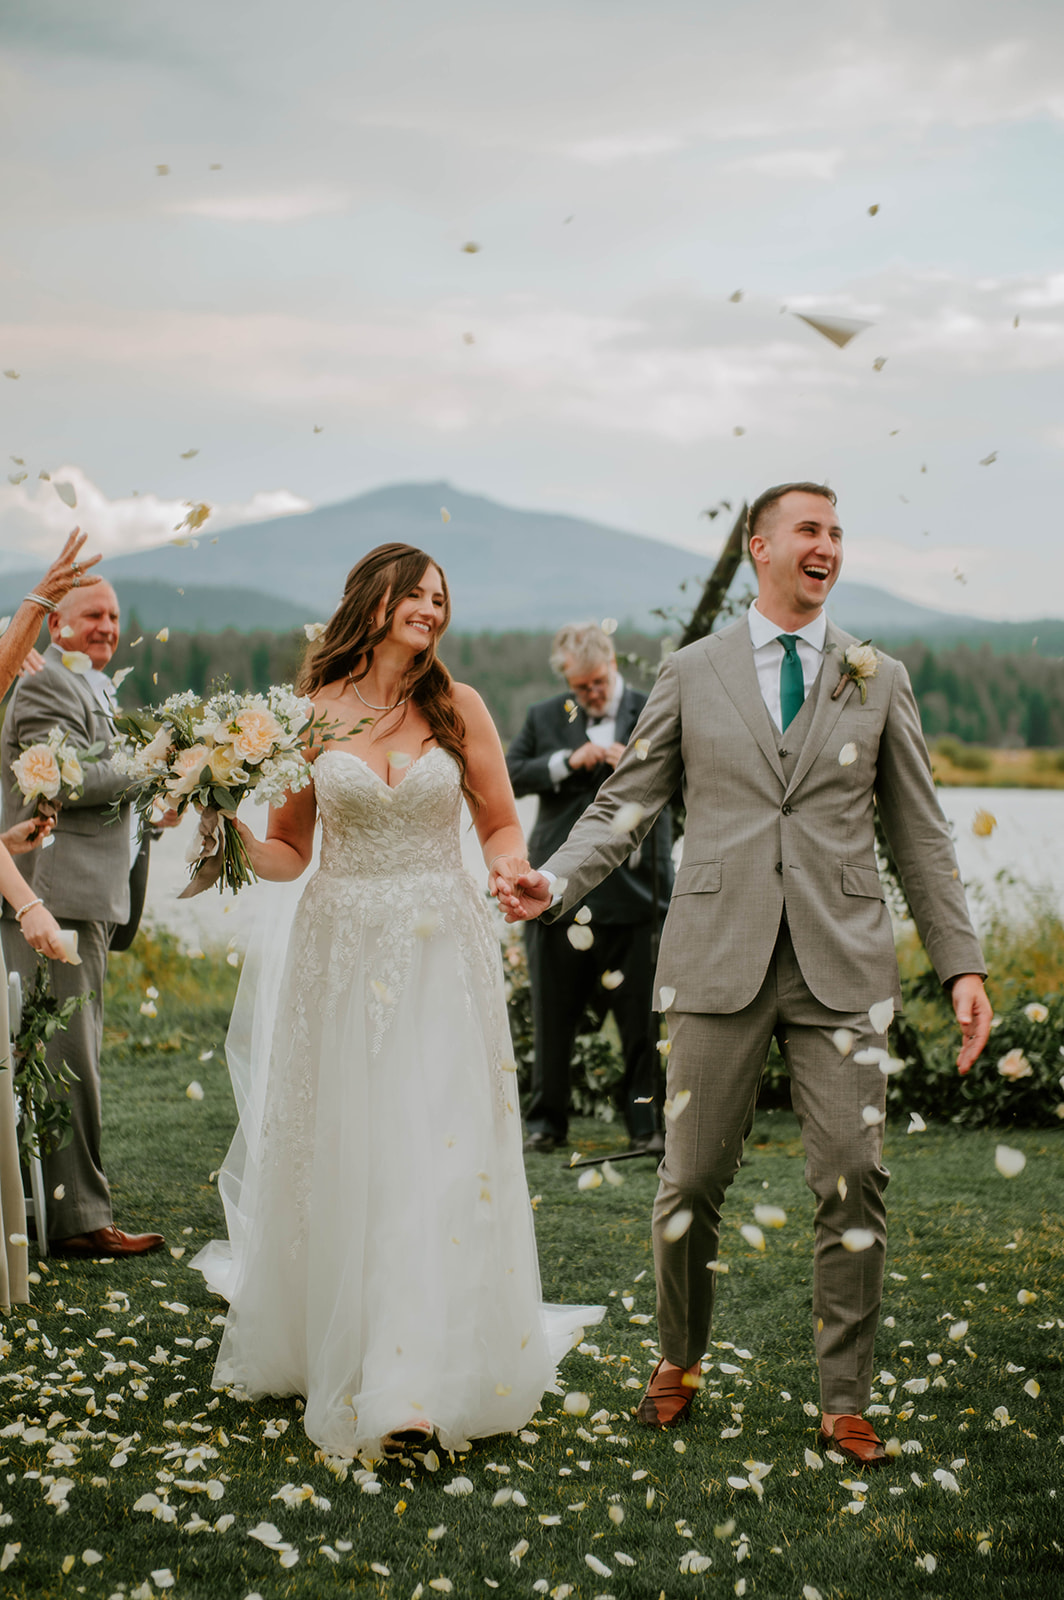 Bride and groom walking through petals after the ceremony at black butte ranch